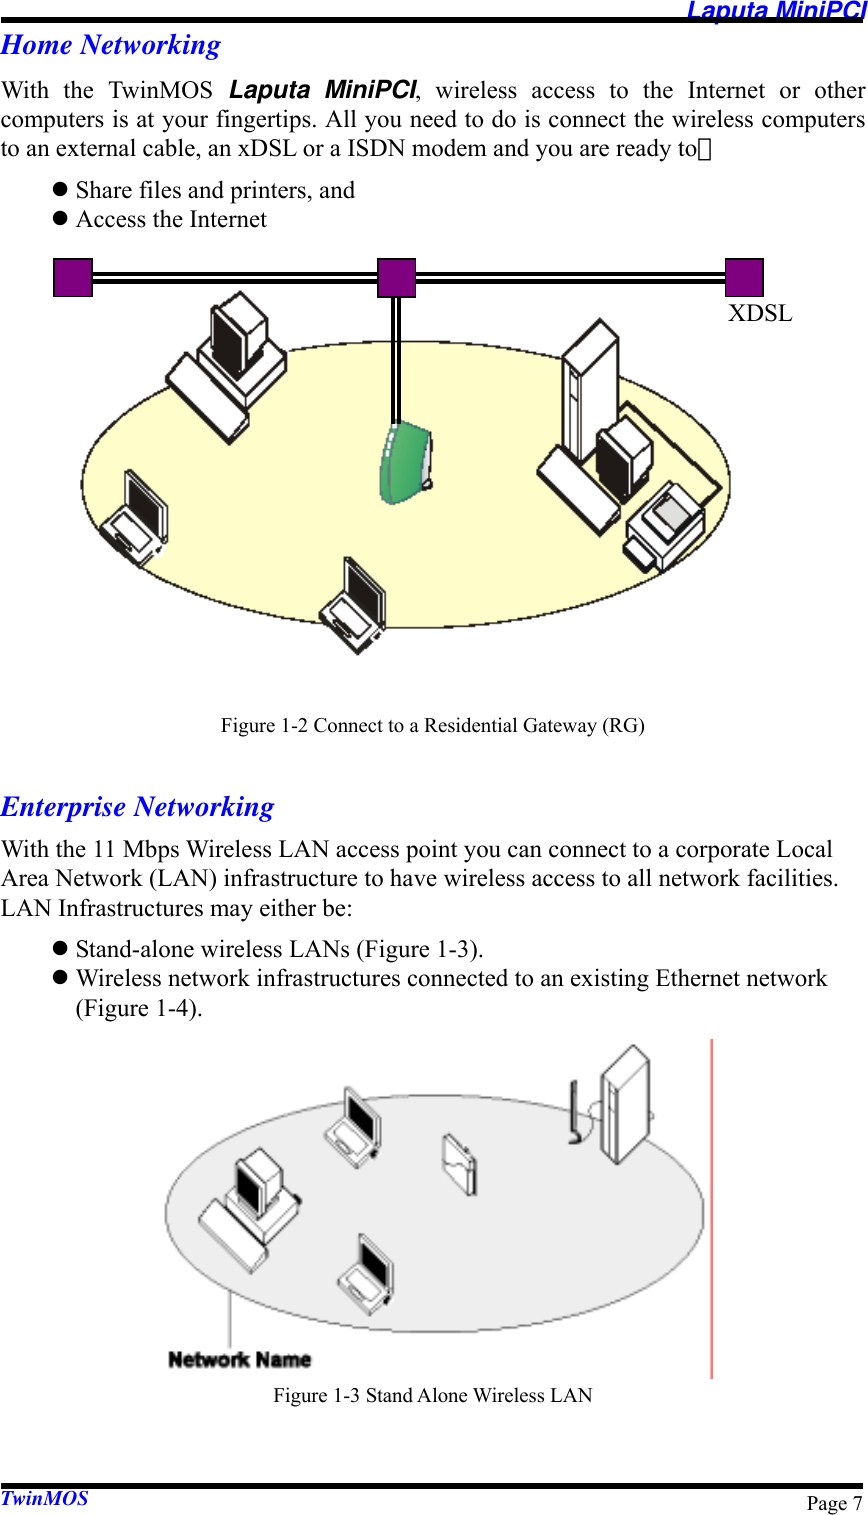   Laputa MiniPCI TwinMOS  Page 7Home Networking With the TwinMOS Laputa MiniPCI, wireless access to the Internet or other computers is at your fingertips. All you need to do is connect the wireless computers to an external cable, an xDSL or a ISDN modem and you are ready to： z Share files and printers, and z Access the Internet  Figure 1-2 Connect to a Residential Gateway (RG)  Enterprise Networking With the 11 Mbps Wireless LAN access point you can connect to a corporate Local Area Network (LAN) infrastructure to have wireless access to all network facilities. LAN Infrastructures may either be: z Stand-alone wireless LANs (Figure 1-3). z Wireless network infrastructures connected to an existing Ethernet network (Figure 1-4). Figure 1-3 Stand Alone Wireless LAN XDSL 